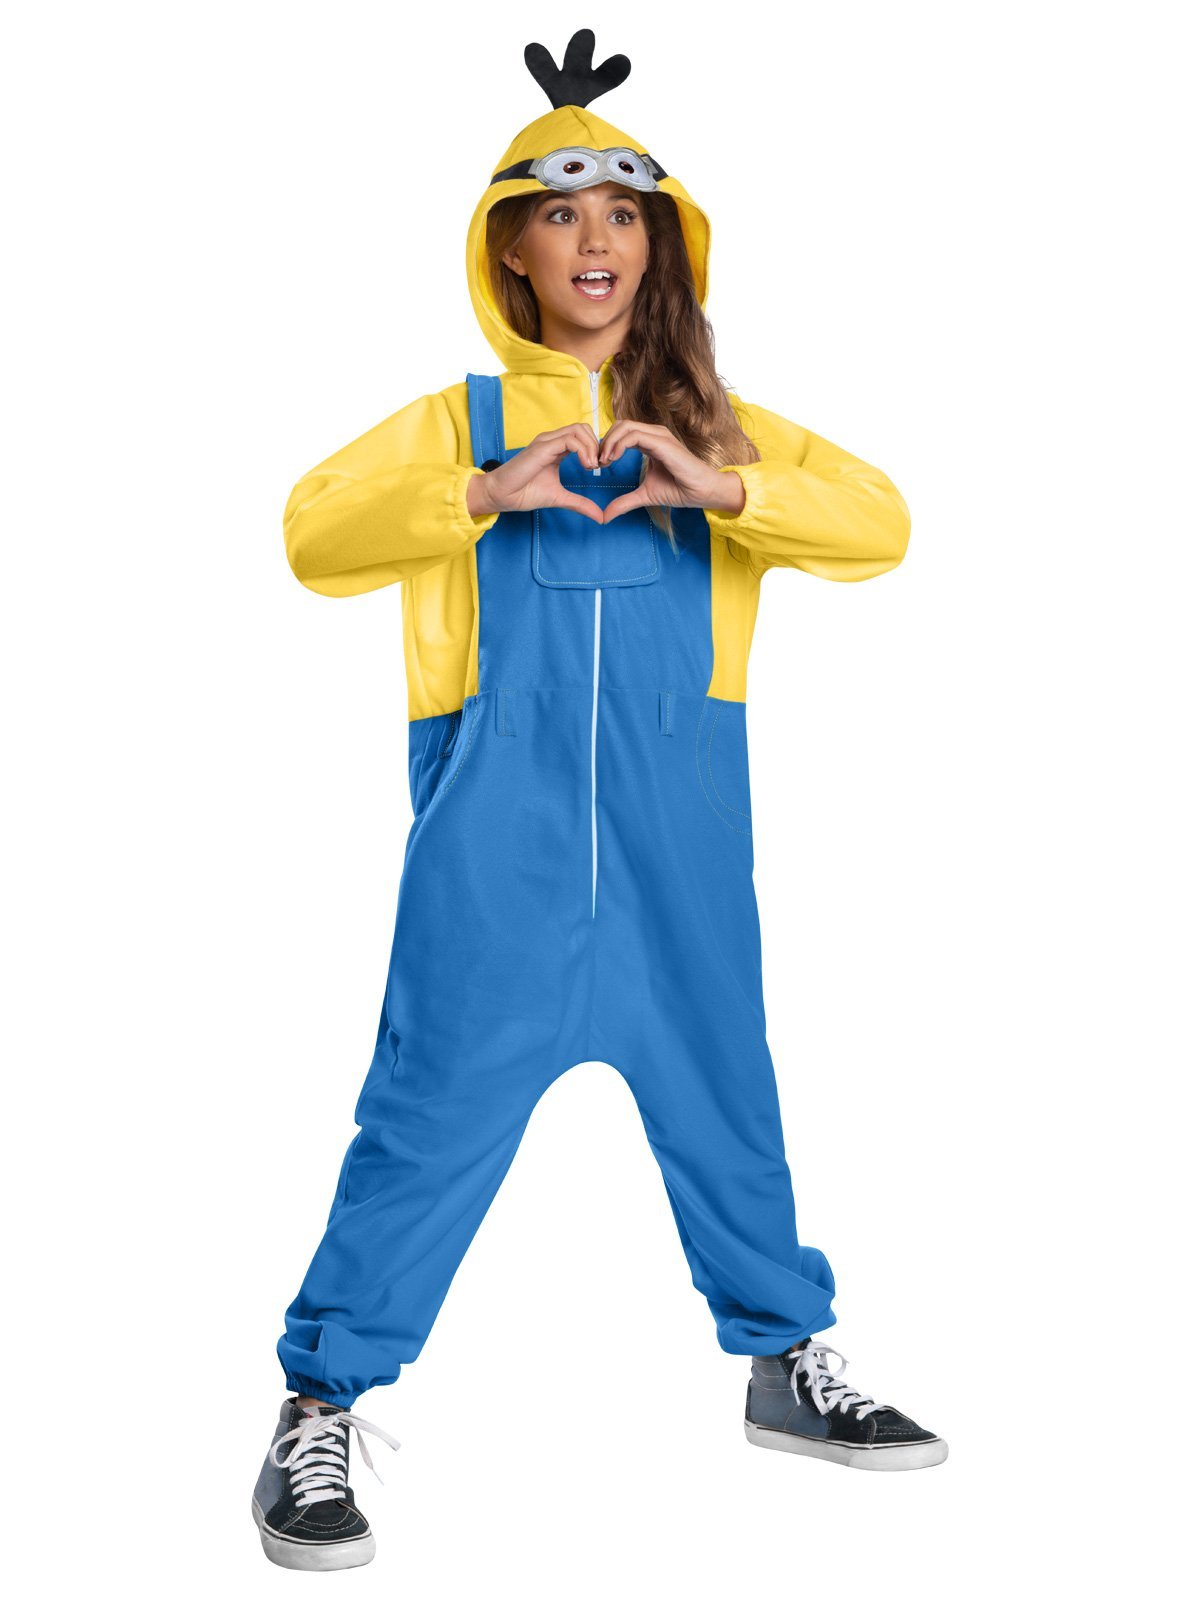 Minion Jumpsuit for Kids - Universal Minions The Rise of Gru